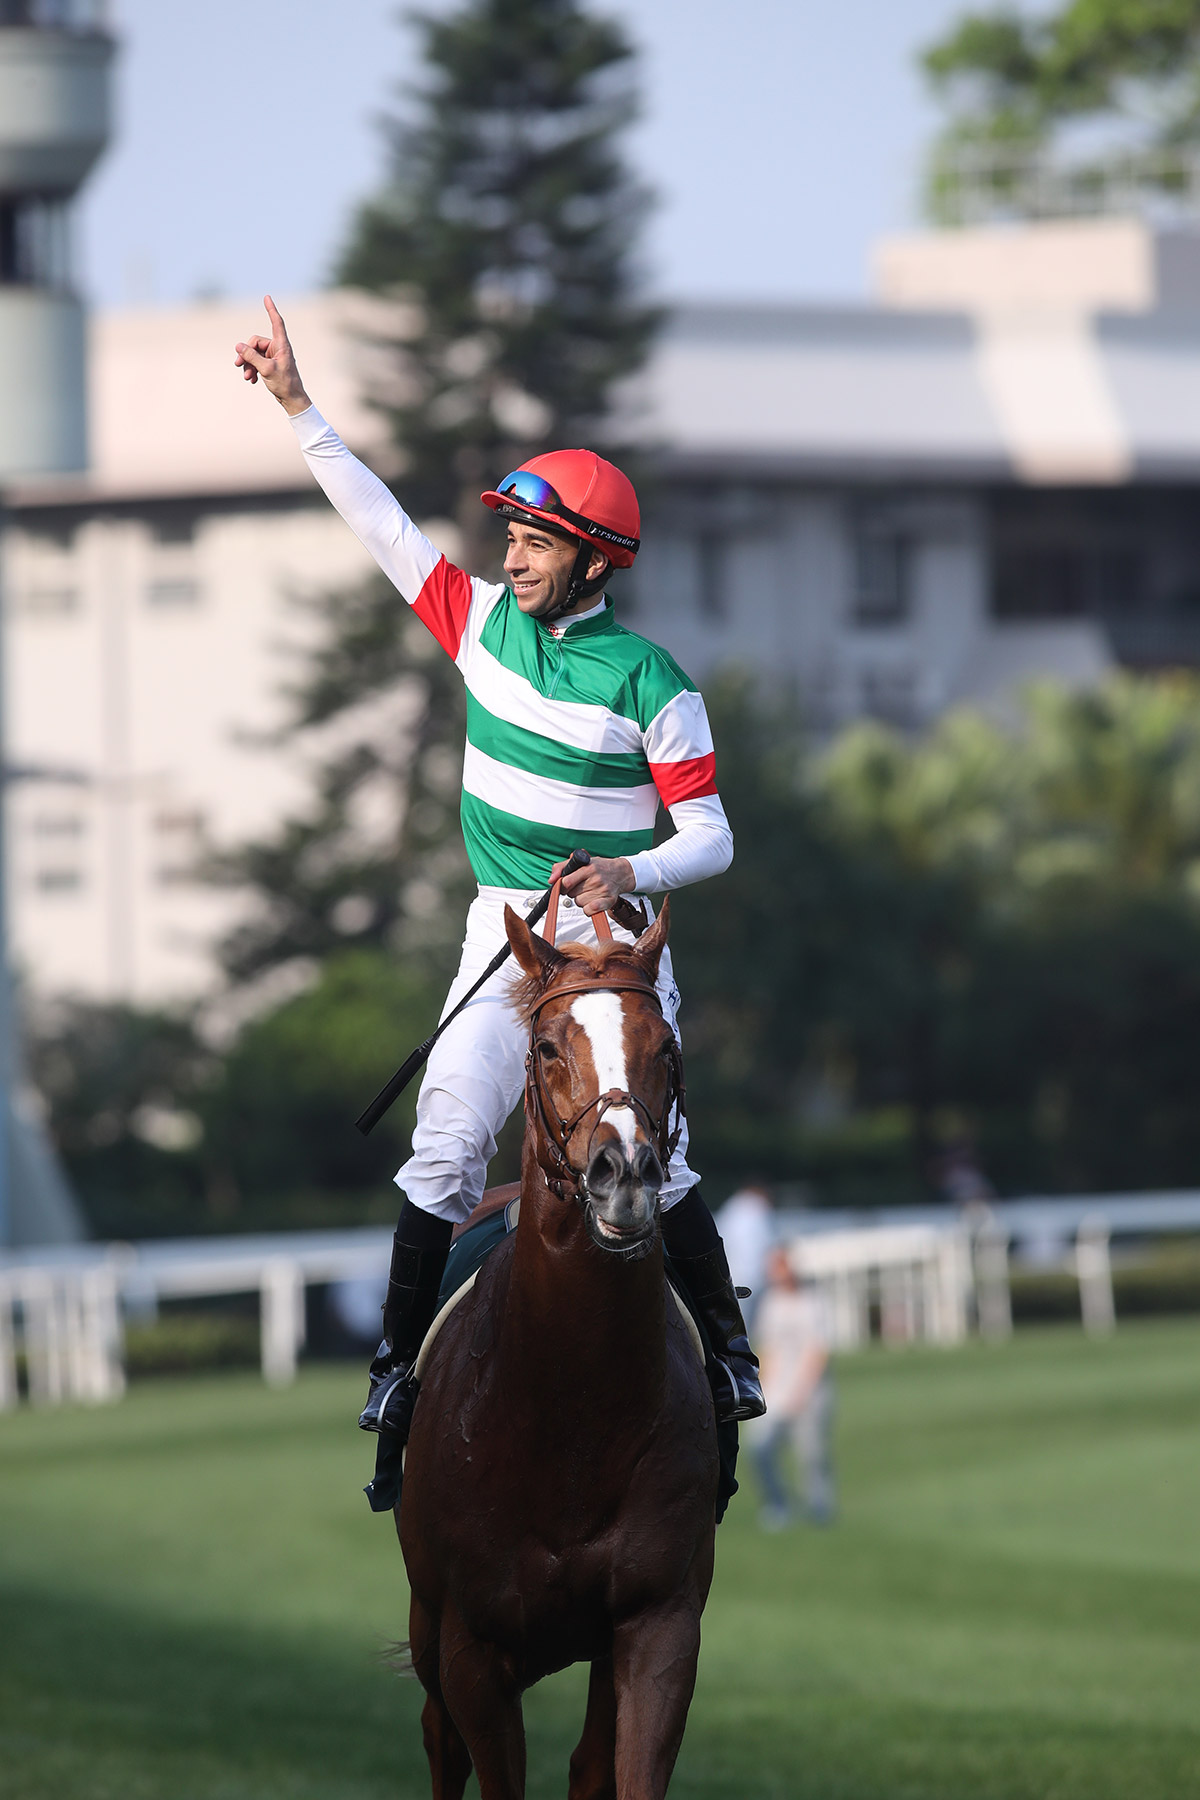 Neorealism takes the G1 QEII Cup at Sha Tin with Joao Moreira in the saddle in April.